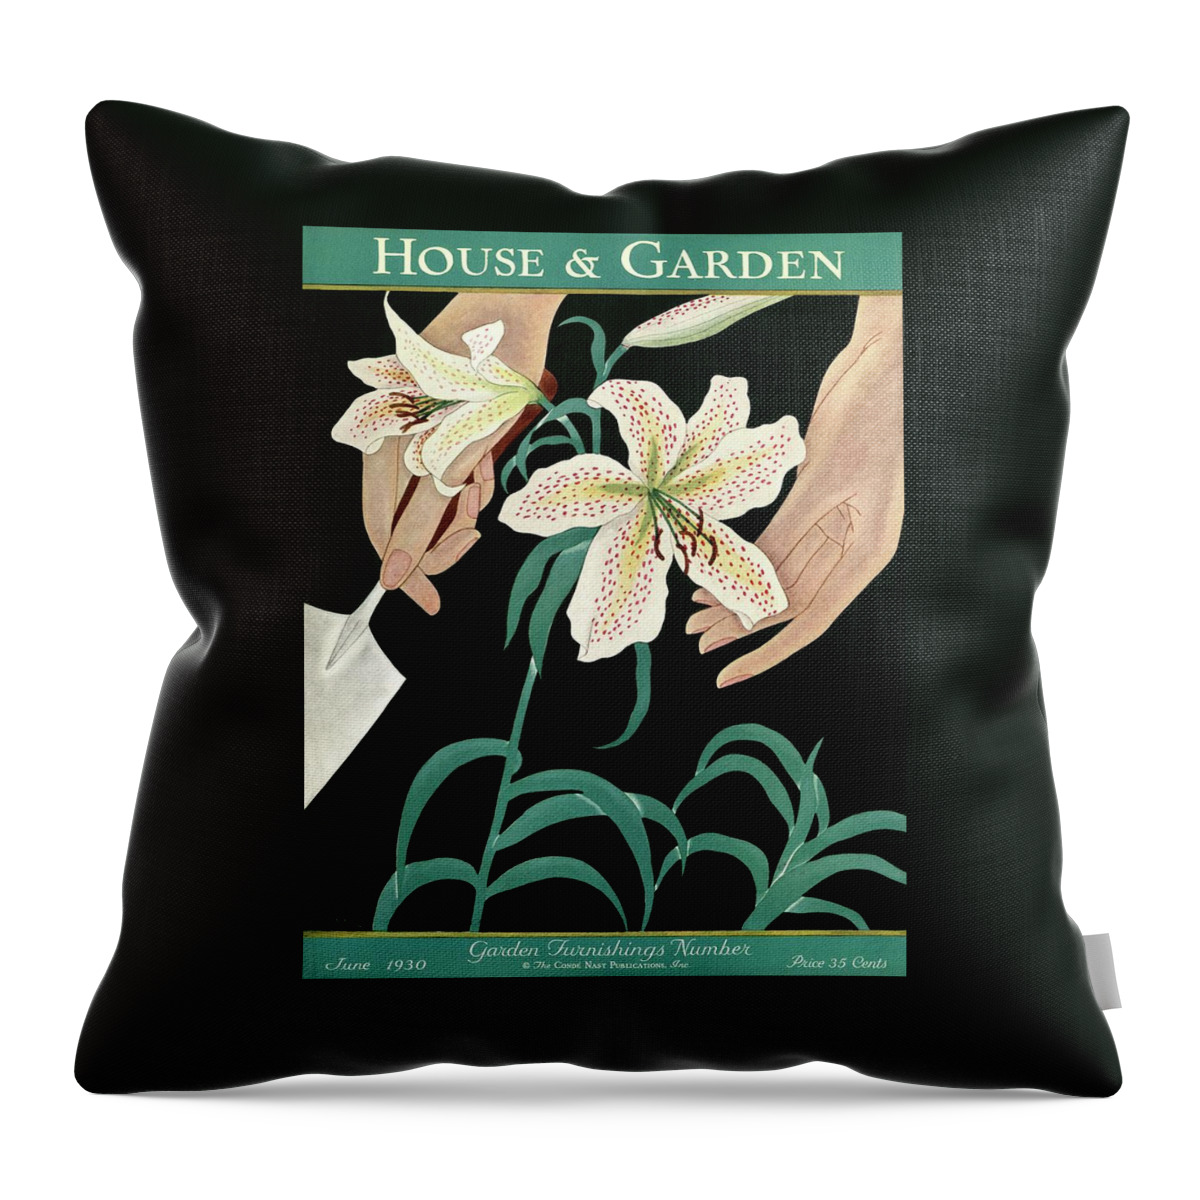 House And Garden Garden Furnishings Number Throw Pillow